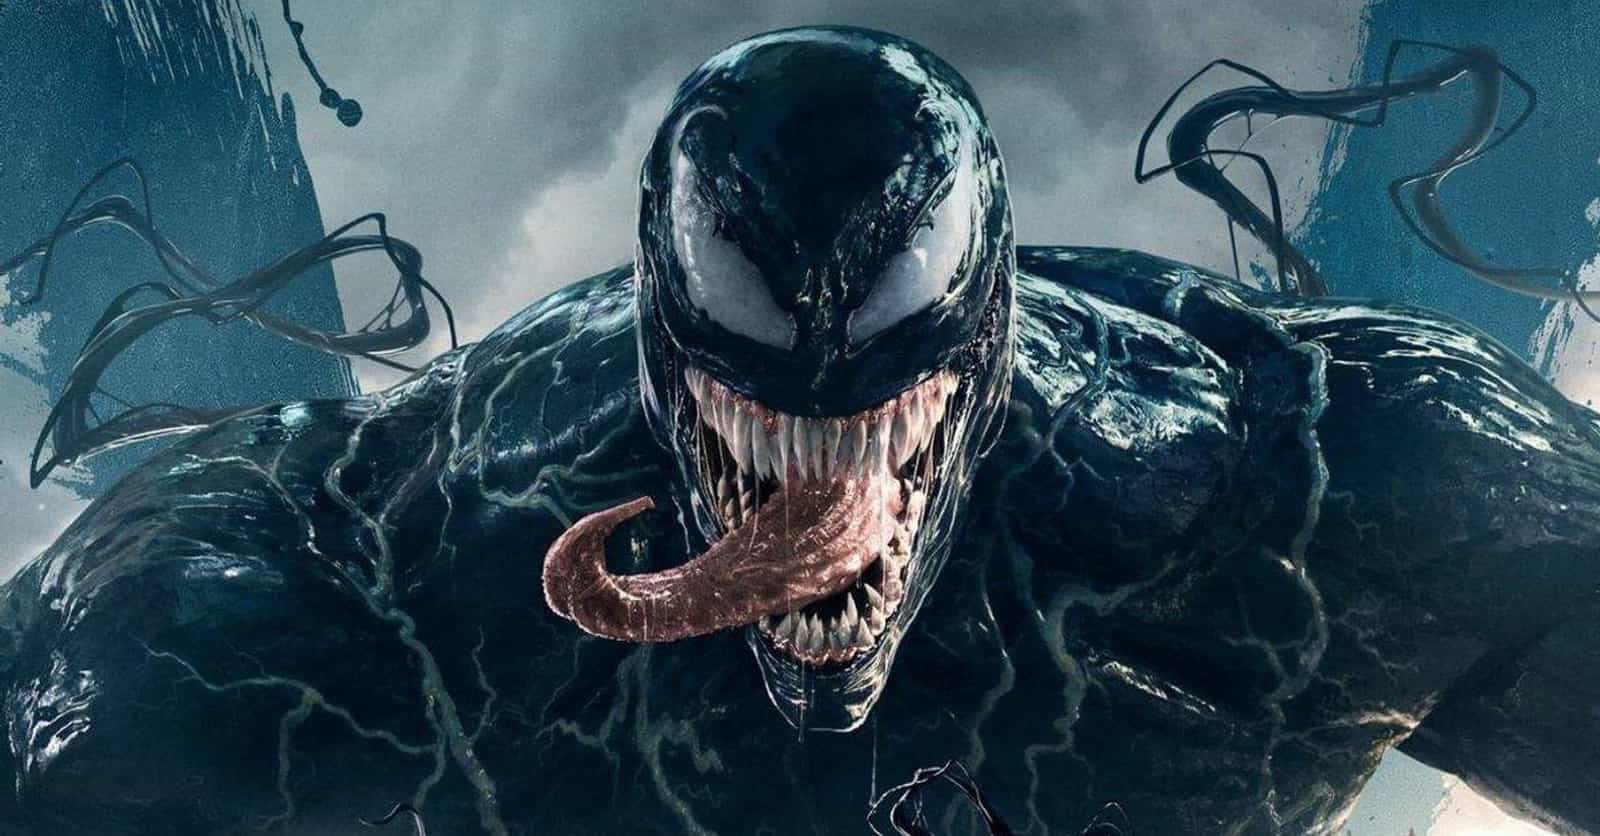 The Real Origin Story Of The Venom Symbiote Is Much More Complicated Than You Think